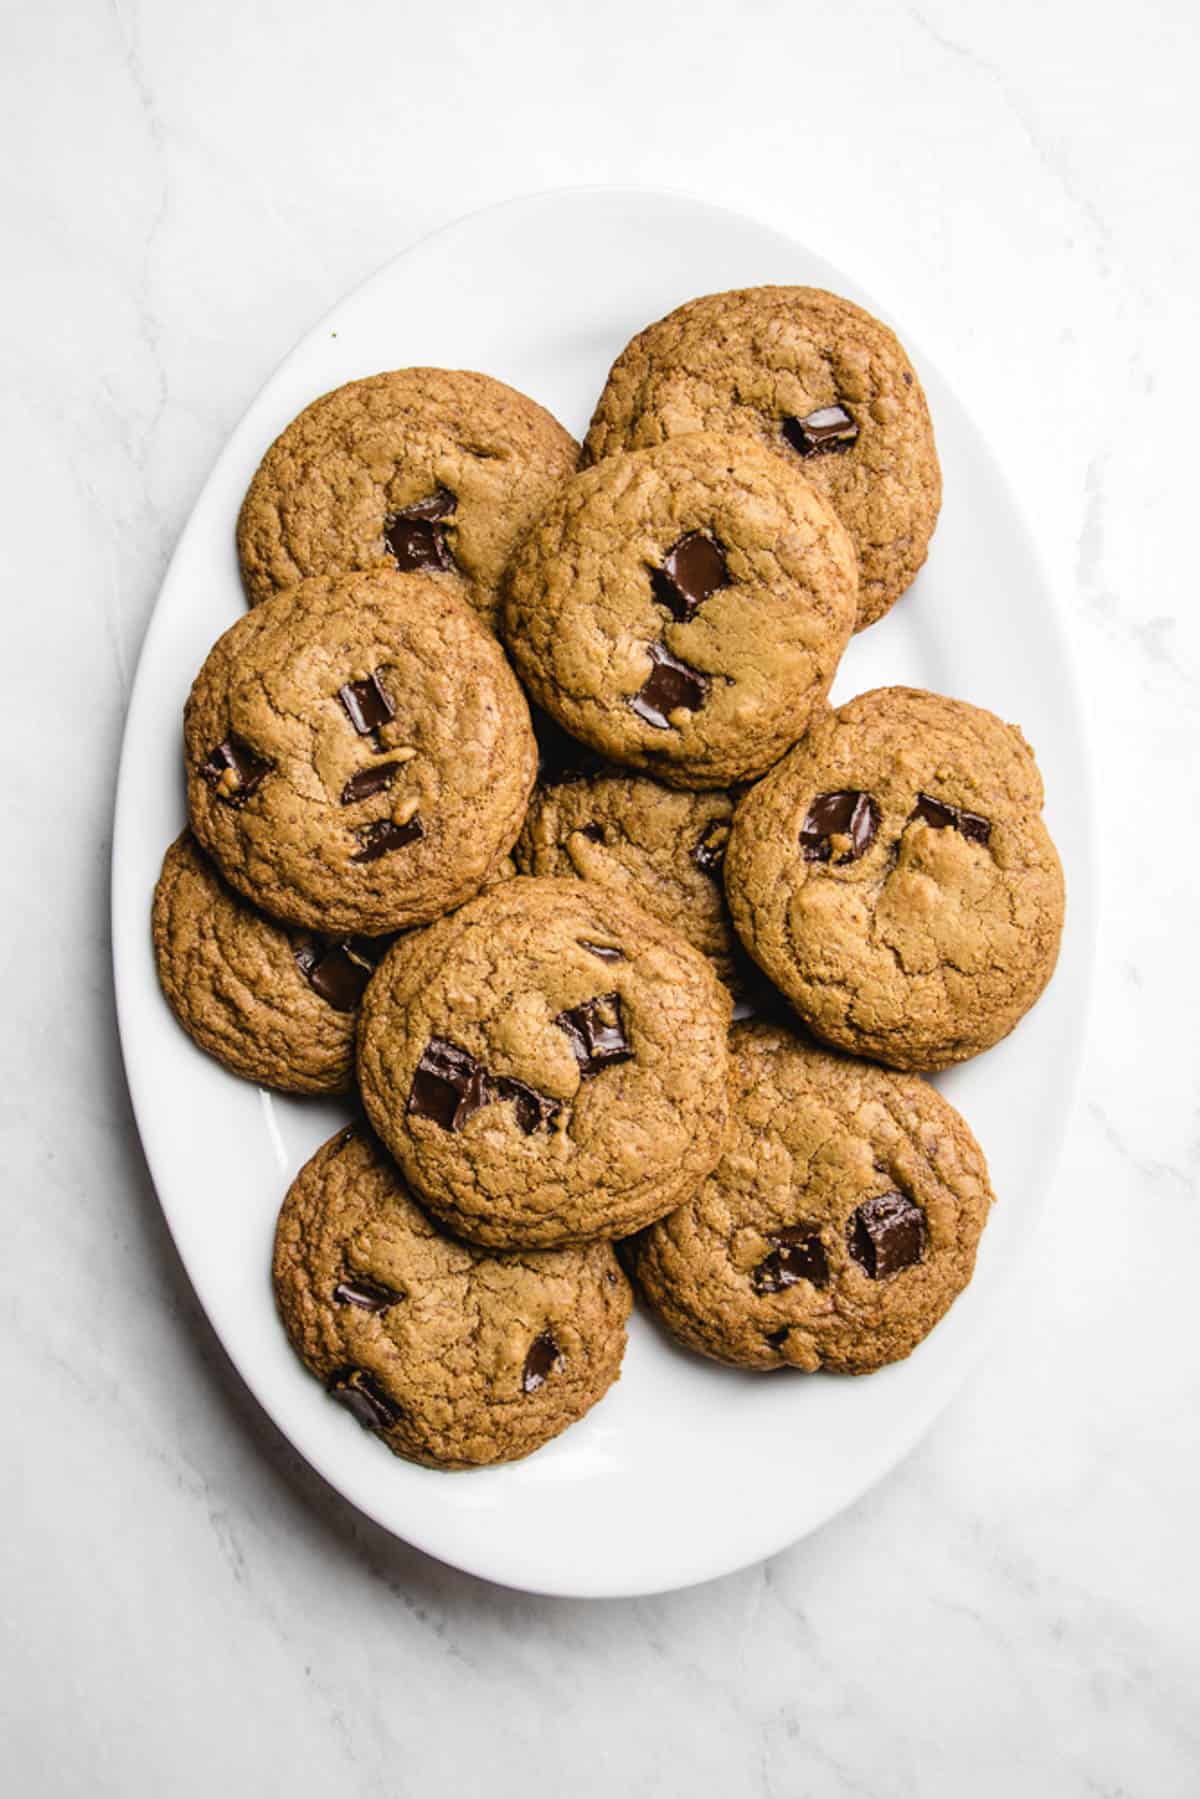 Chocolate chip cookies on a white oval plate.